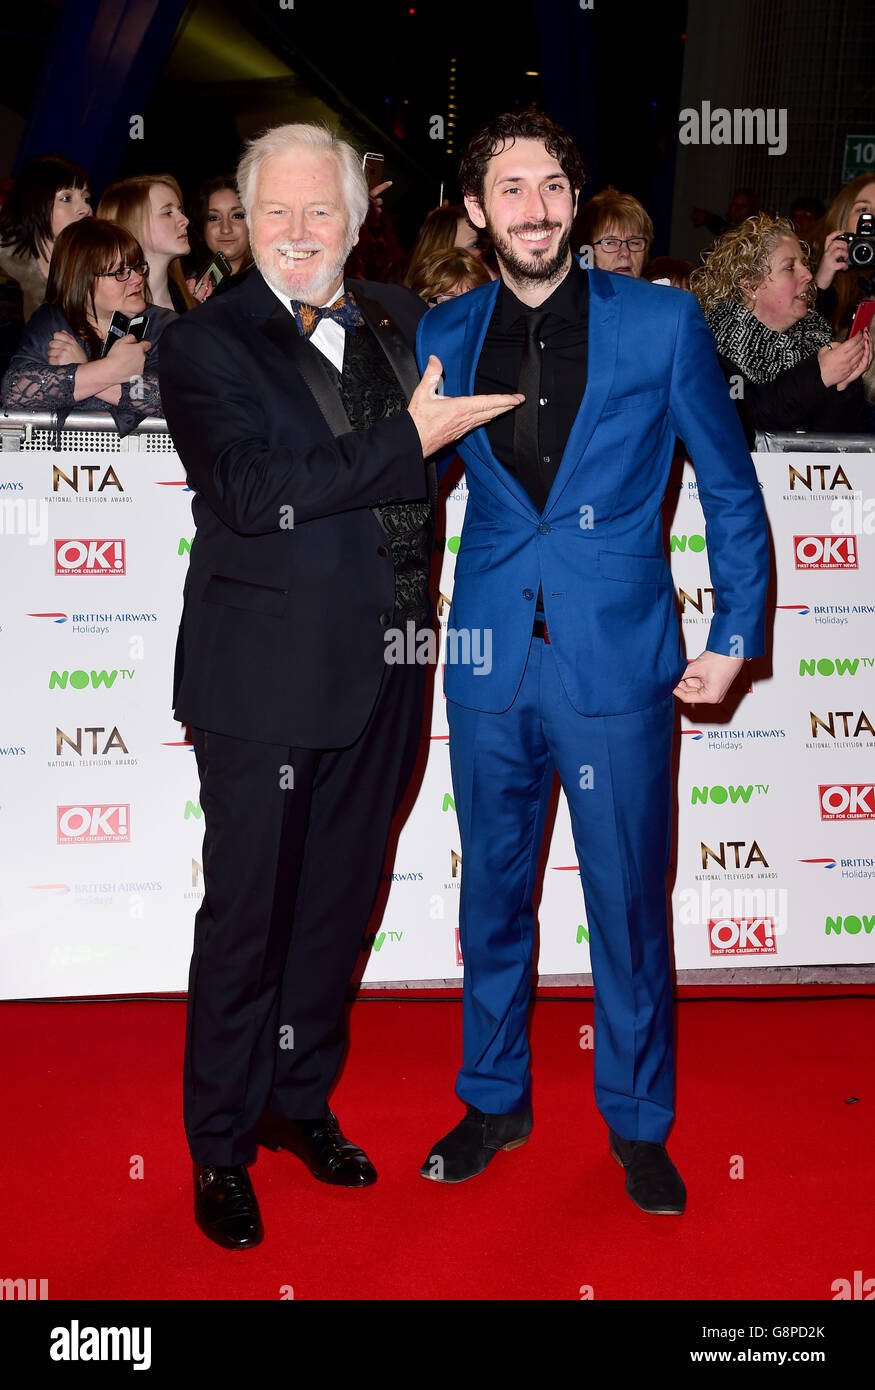 Blake Harrison (right) and Ian Lavender arriving at the National Television Awards 2016 held at The O2 Arena in London. PRESS ASSOCIATION Photo. See PA story NTAs. Picture date: Wednesday January 20, 2016. Photo credit should read: Ian West/PA Wire Stock Photo